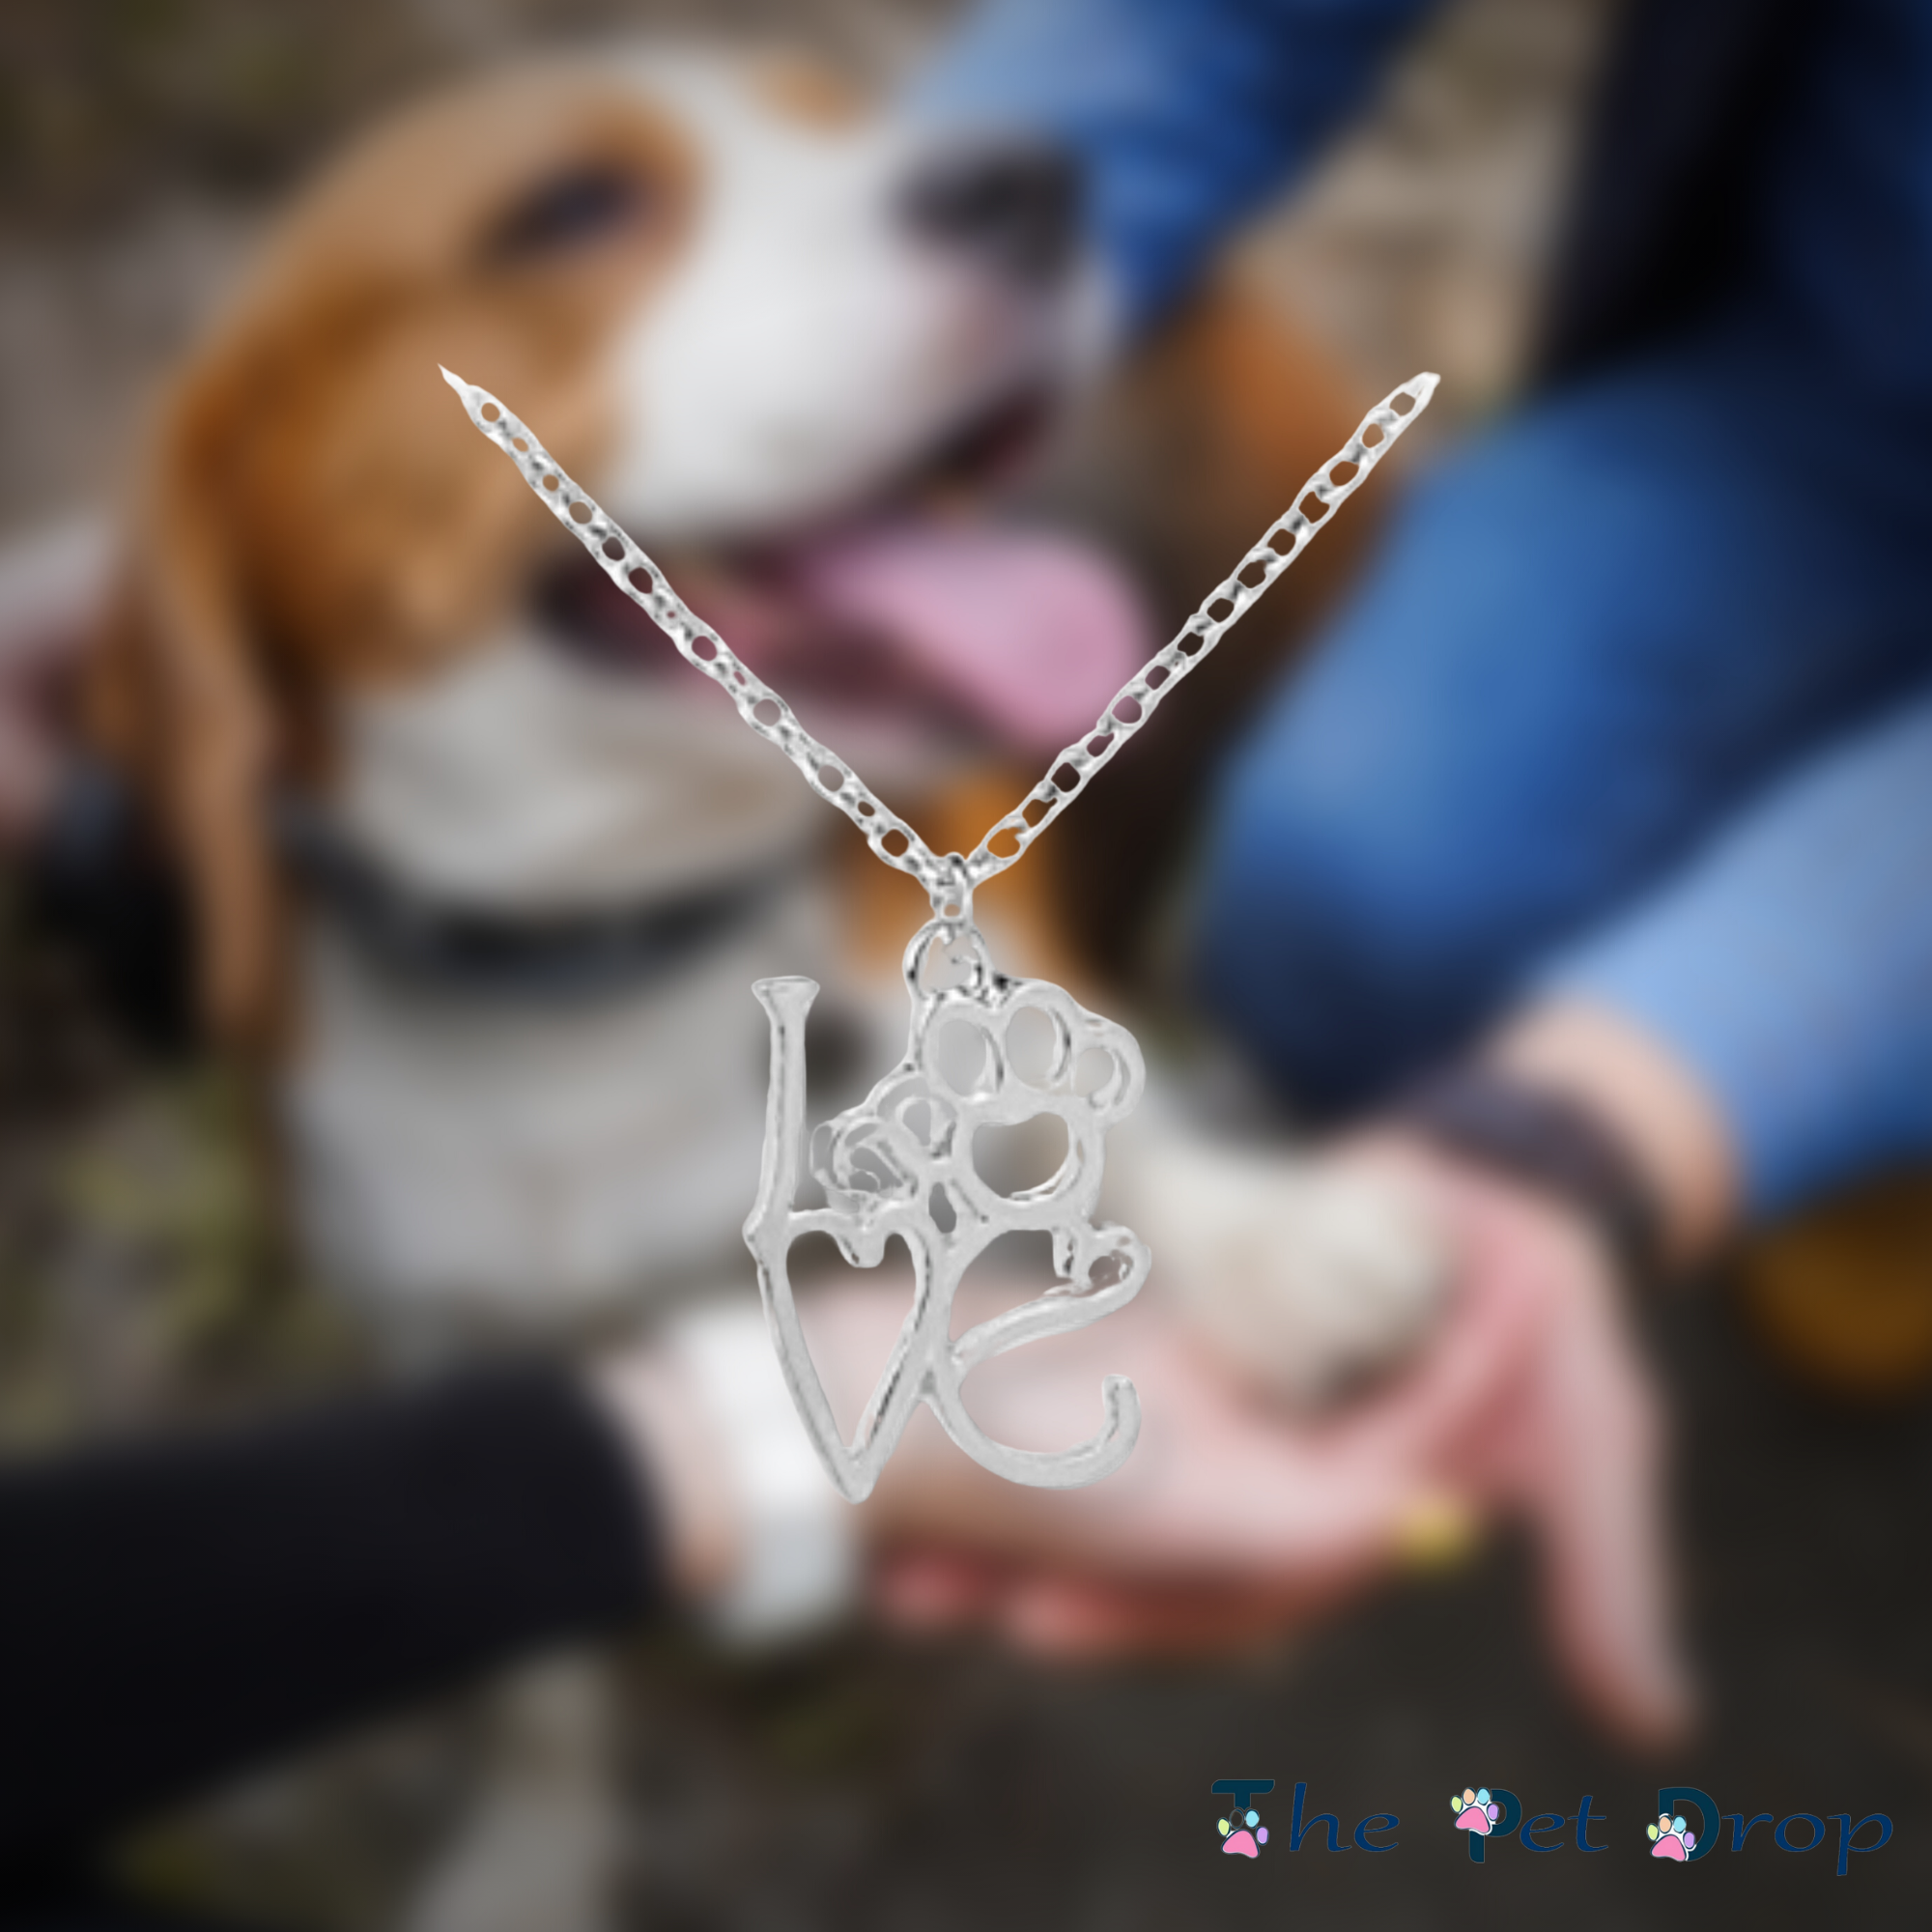 Paws for Love Necklace